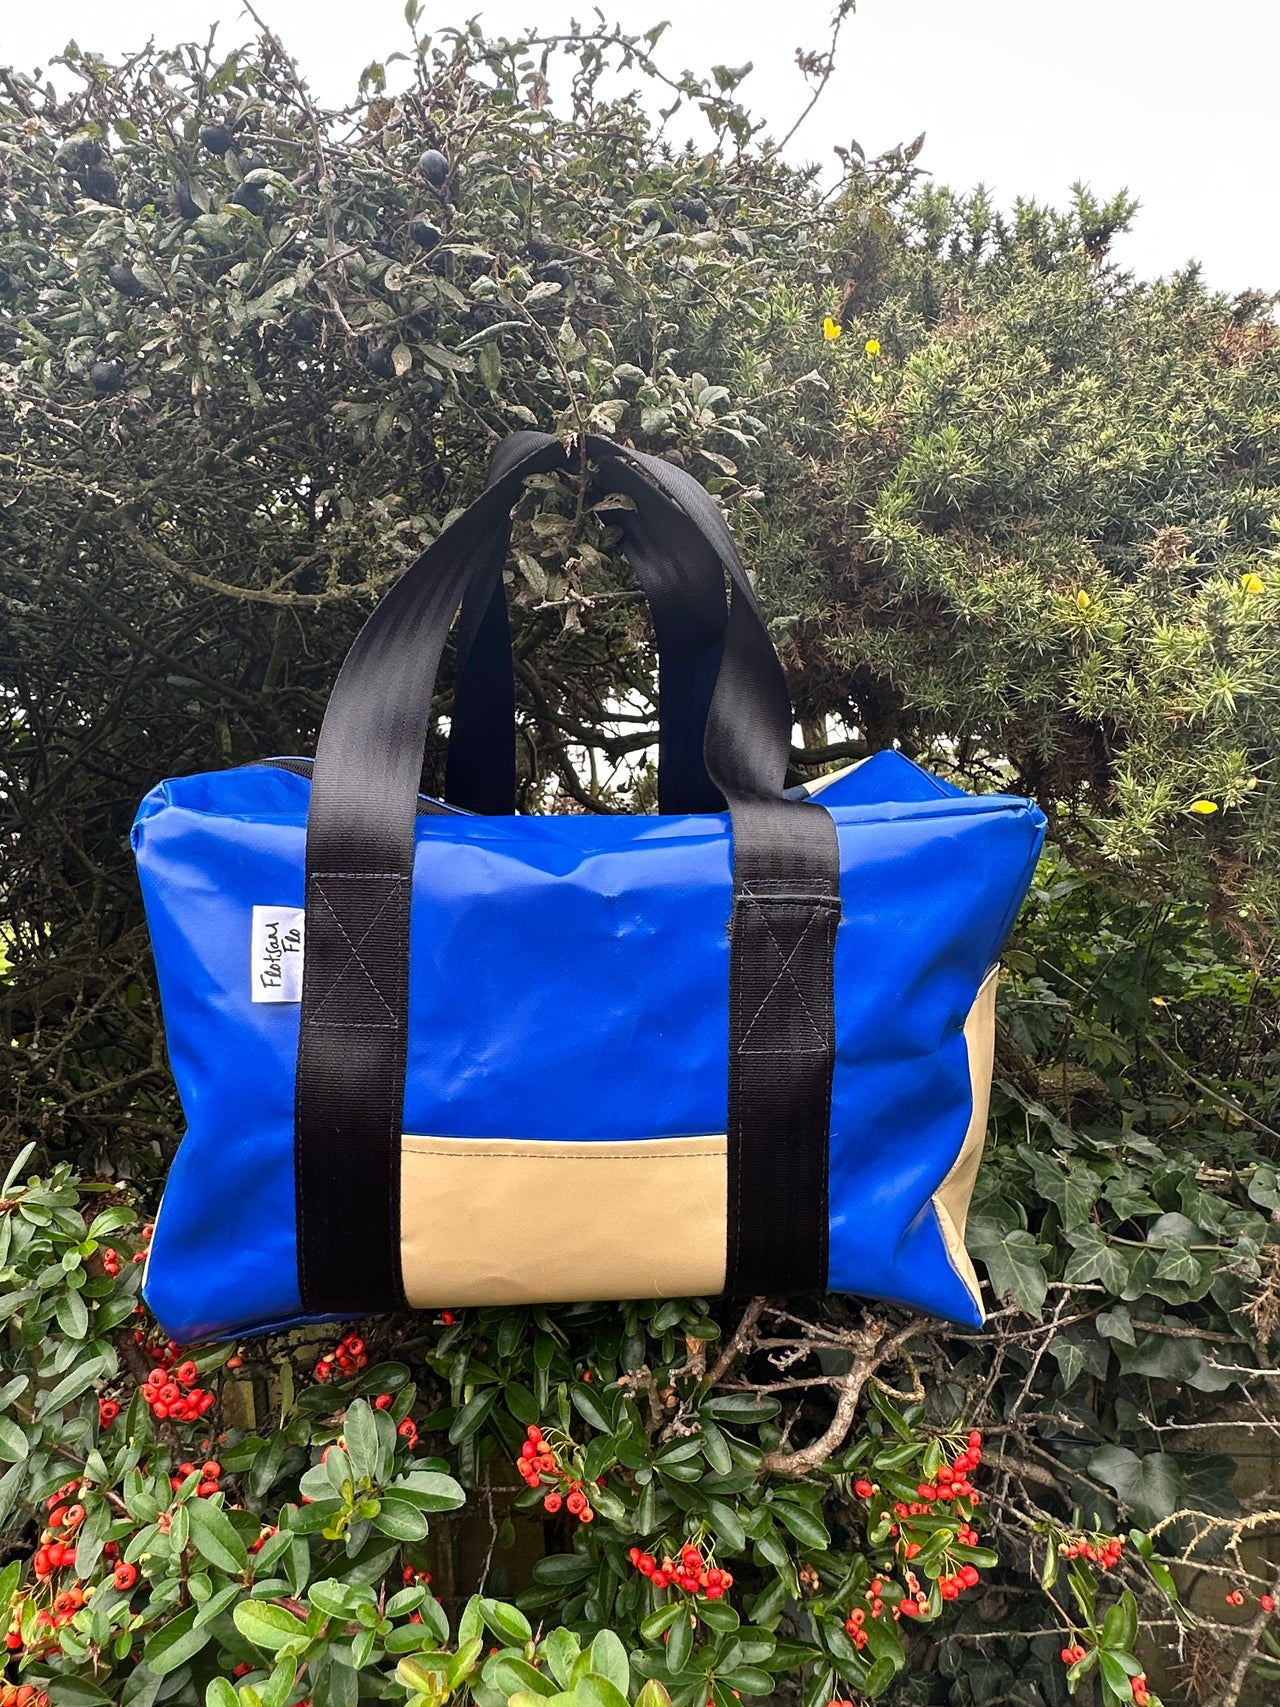 I was off cuts of canopies and Seatbelts - Overnight holdall bag